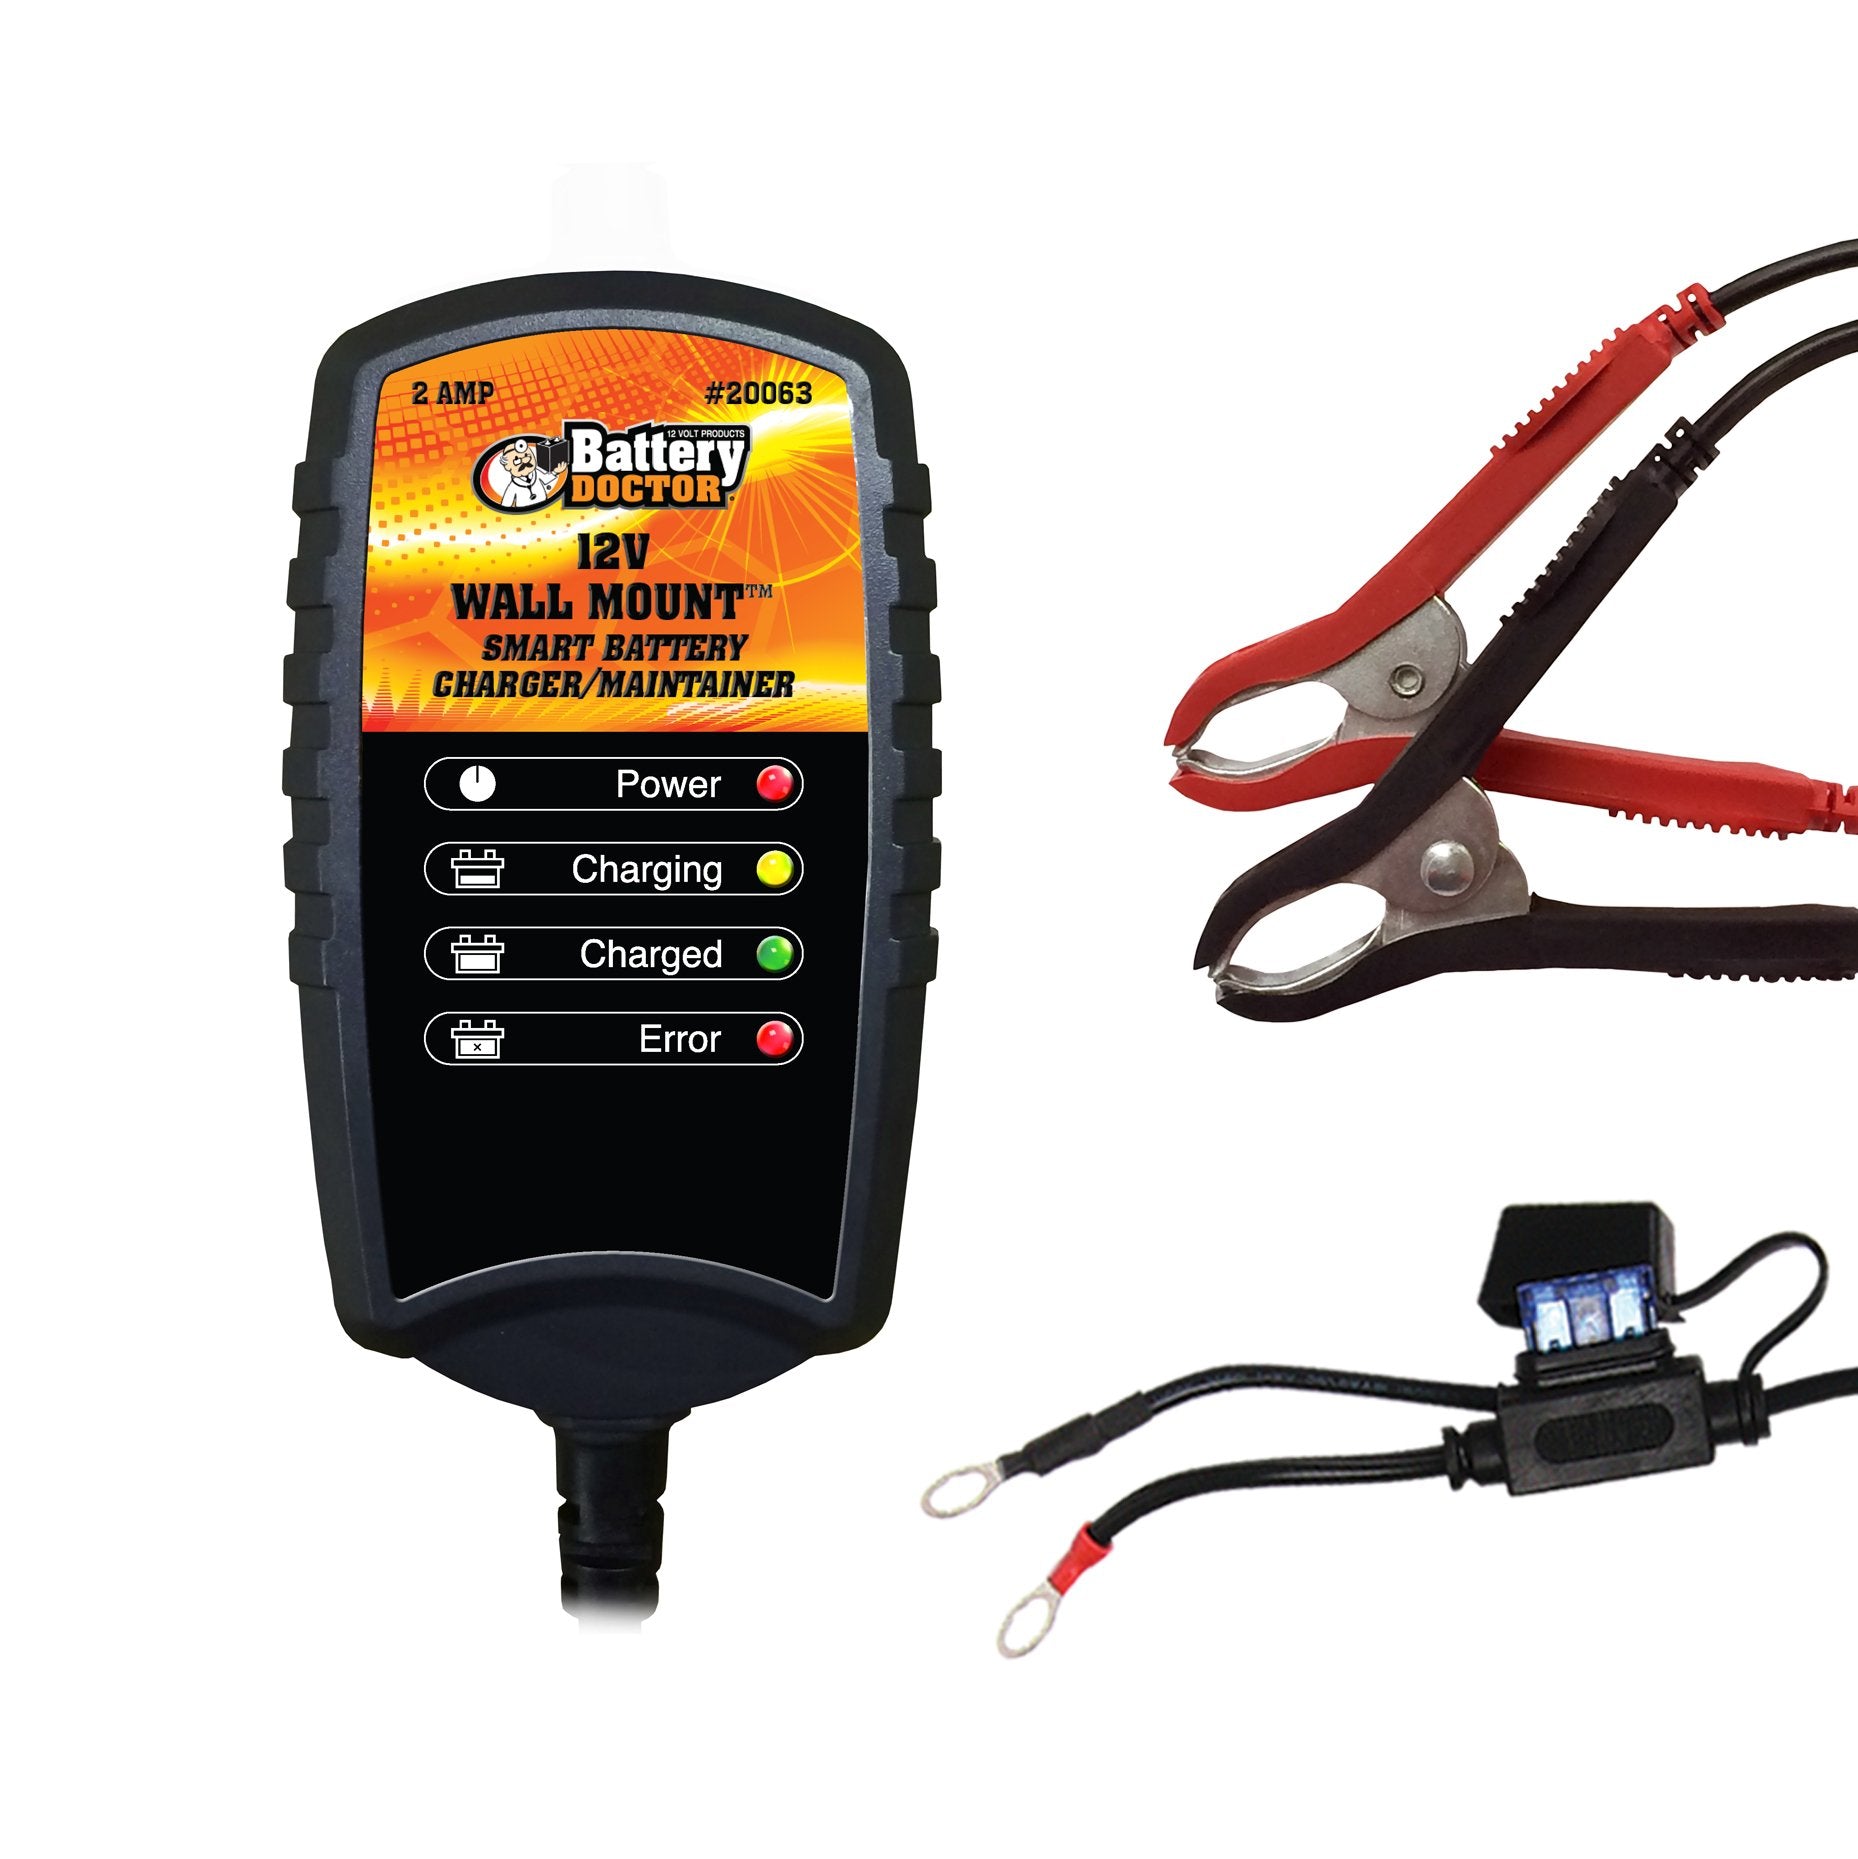 WirthCo 20063 Battery Doctor Black CEC Certified Wall Mount Battery Charger